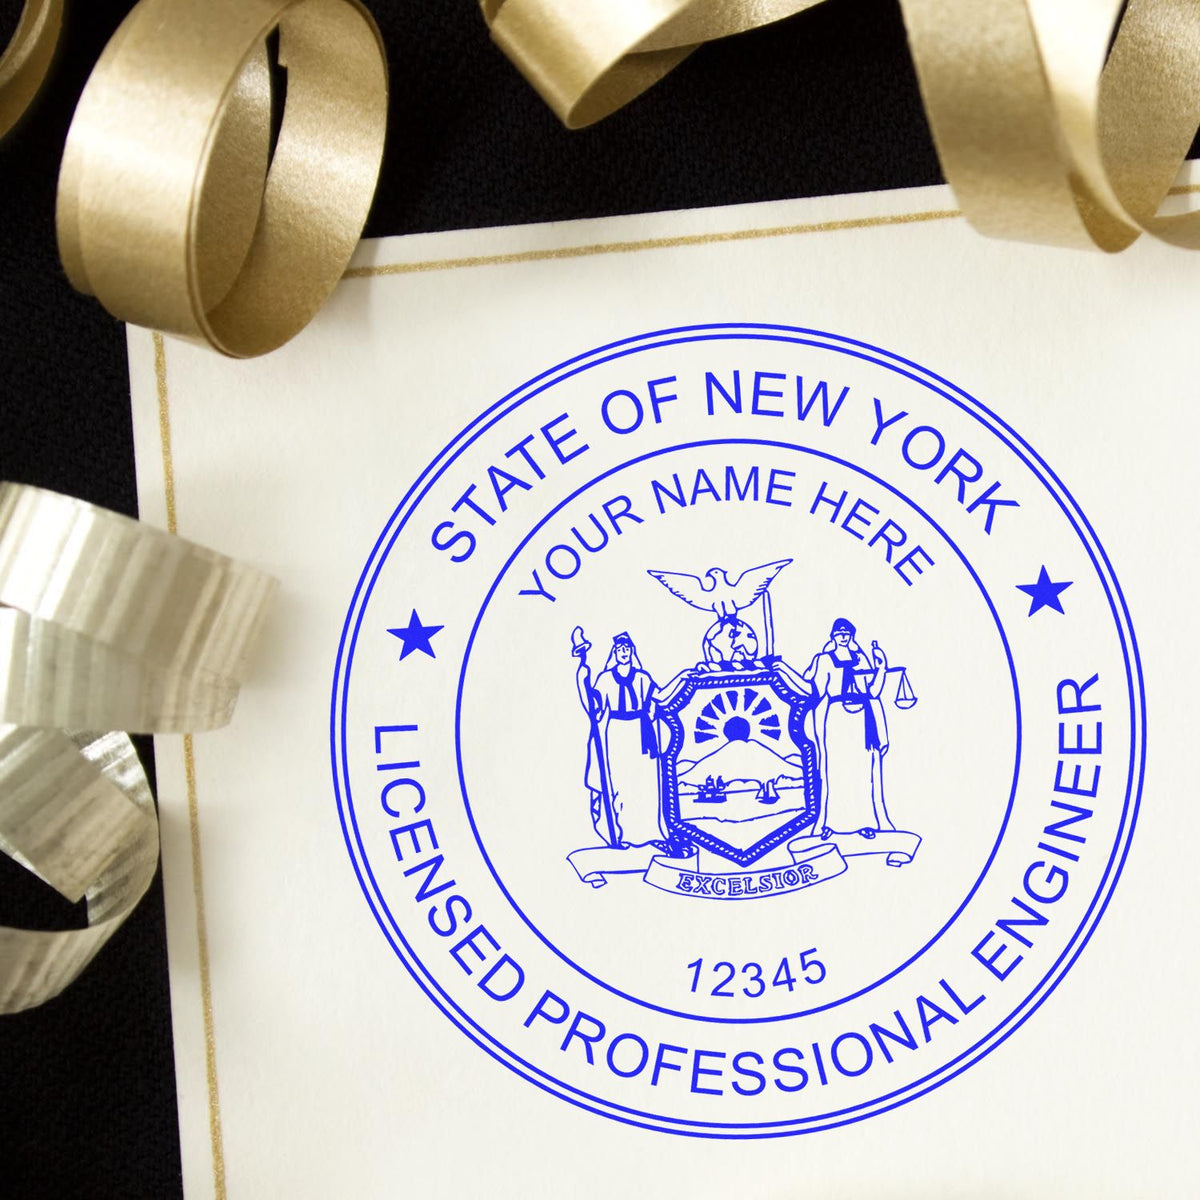 The Slim Pre-Inked New York Professional Engineer Seal Stamp stamp impression comes to life with a crisp, detailed photo on paper - showcasing true professional quality.